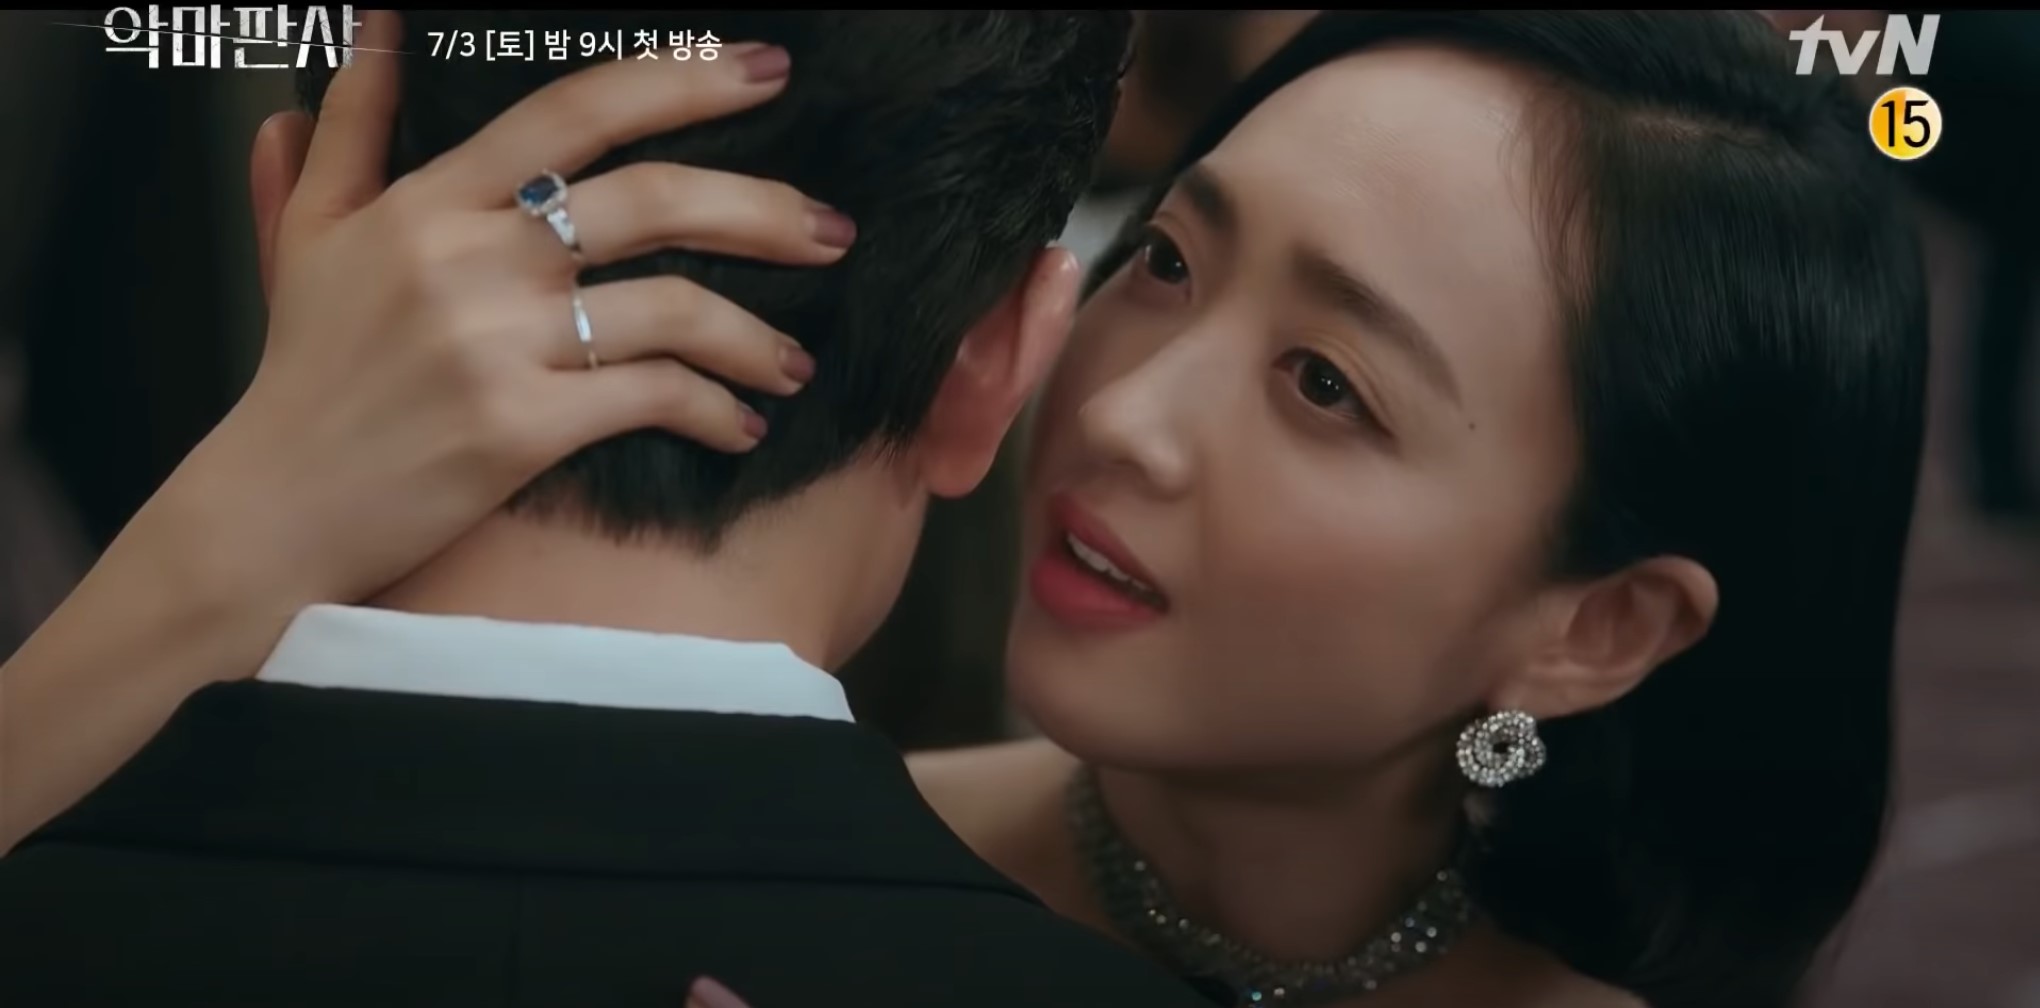 Kim Min-jung antagonizes Ji Sung in new promos for The Devil Judge